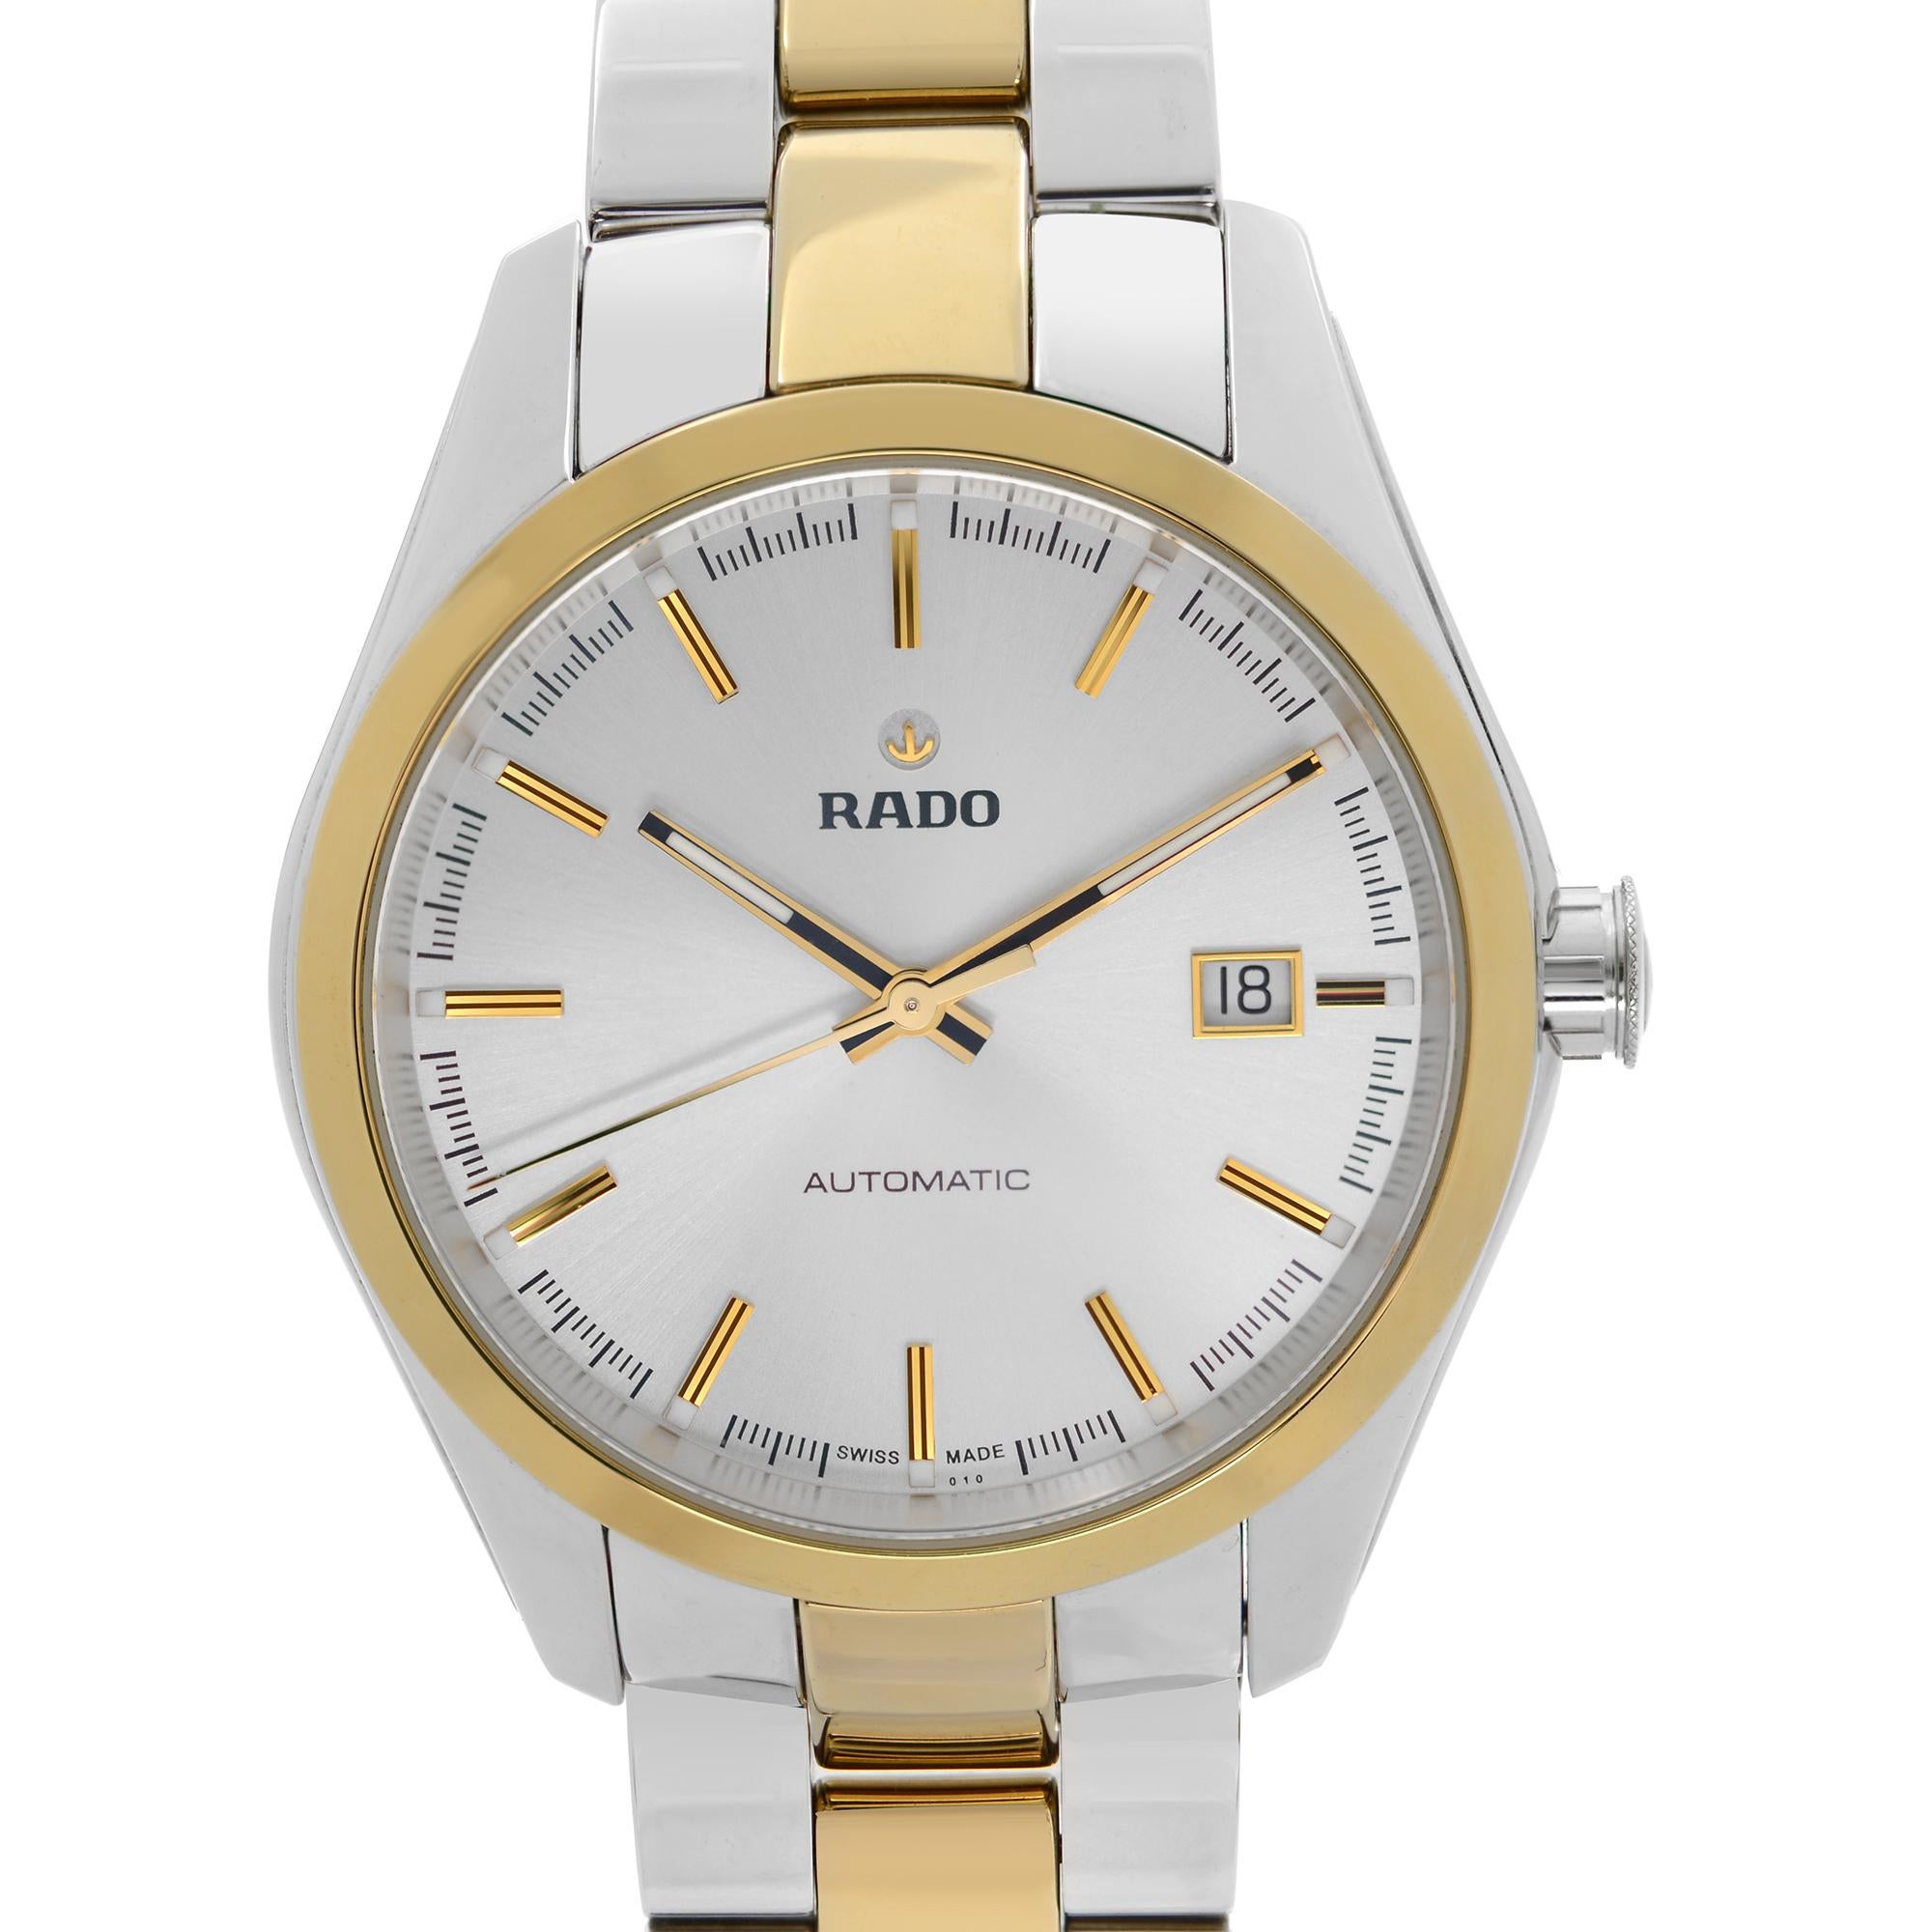 NEW WITH DEFECTS
The watch has never been worn or used. It has a micro dent on the bezel due to store handling. Comes with a gift box and the seller's warranty card. 

 Brand: Rado  Type: Wristwatch  Department: Men  Model Number: R32979102 